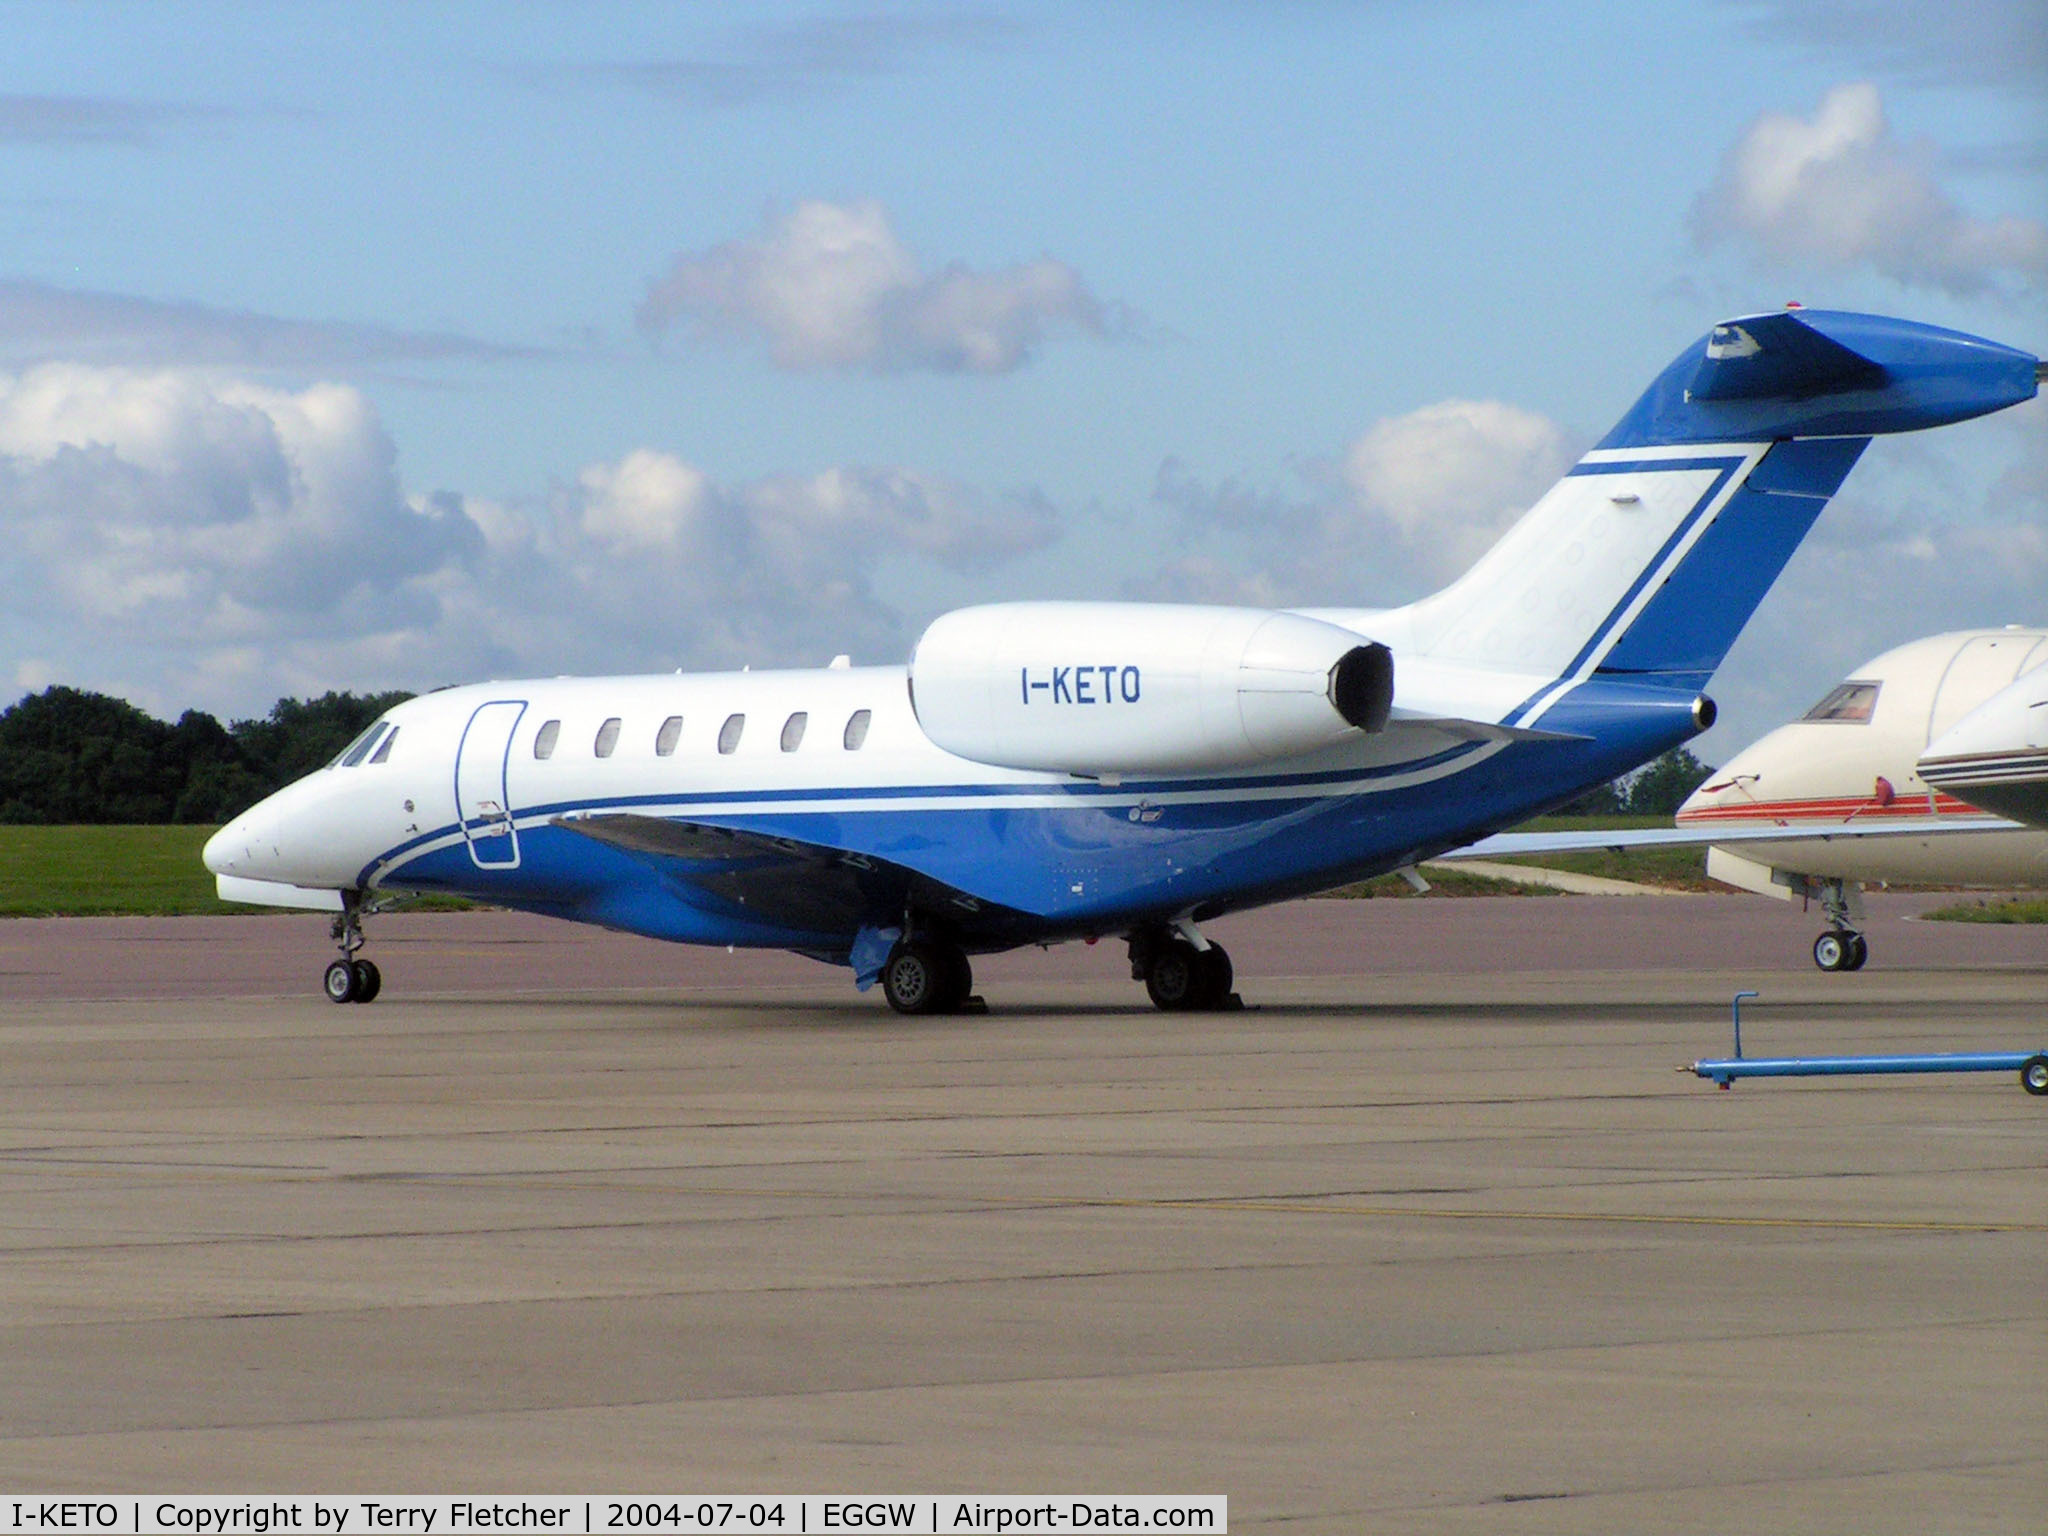 I-KETO, 2001 Cessna C750 C/N 0161, Italian Citation X at London Luton - subsequently re-registered as N232CF